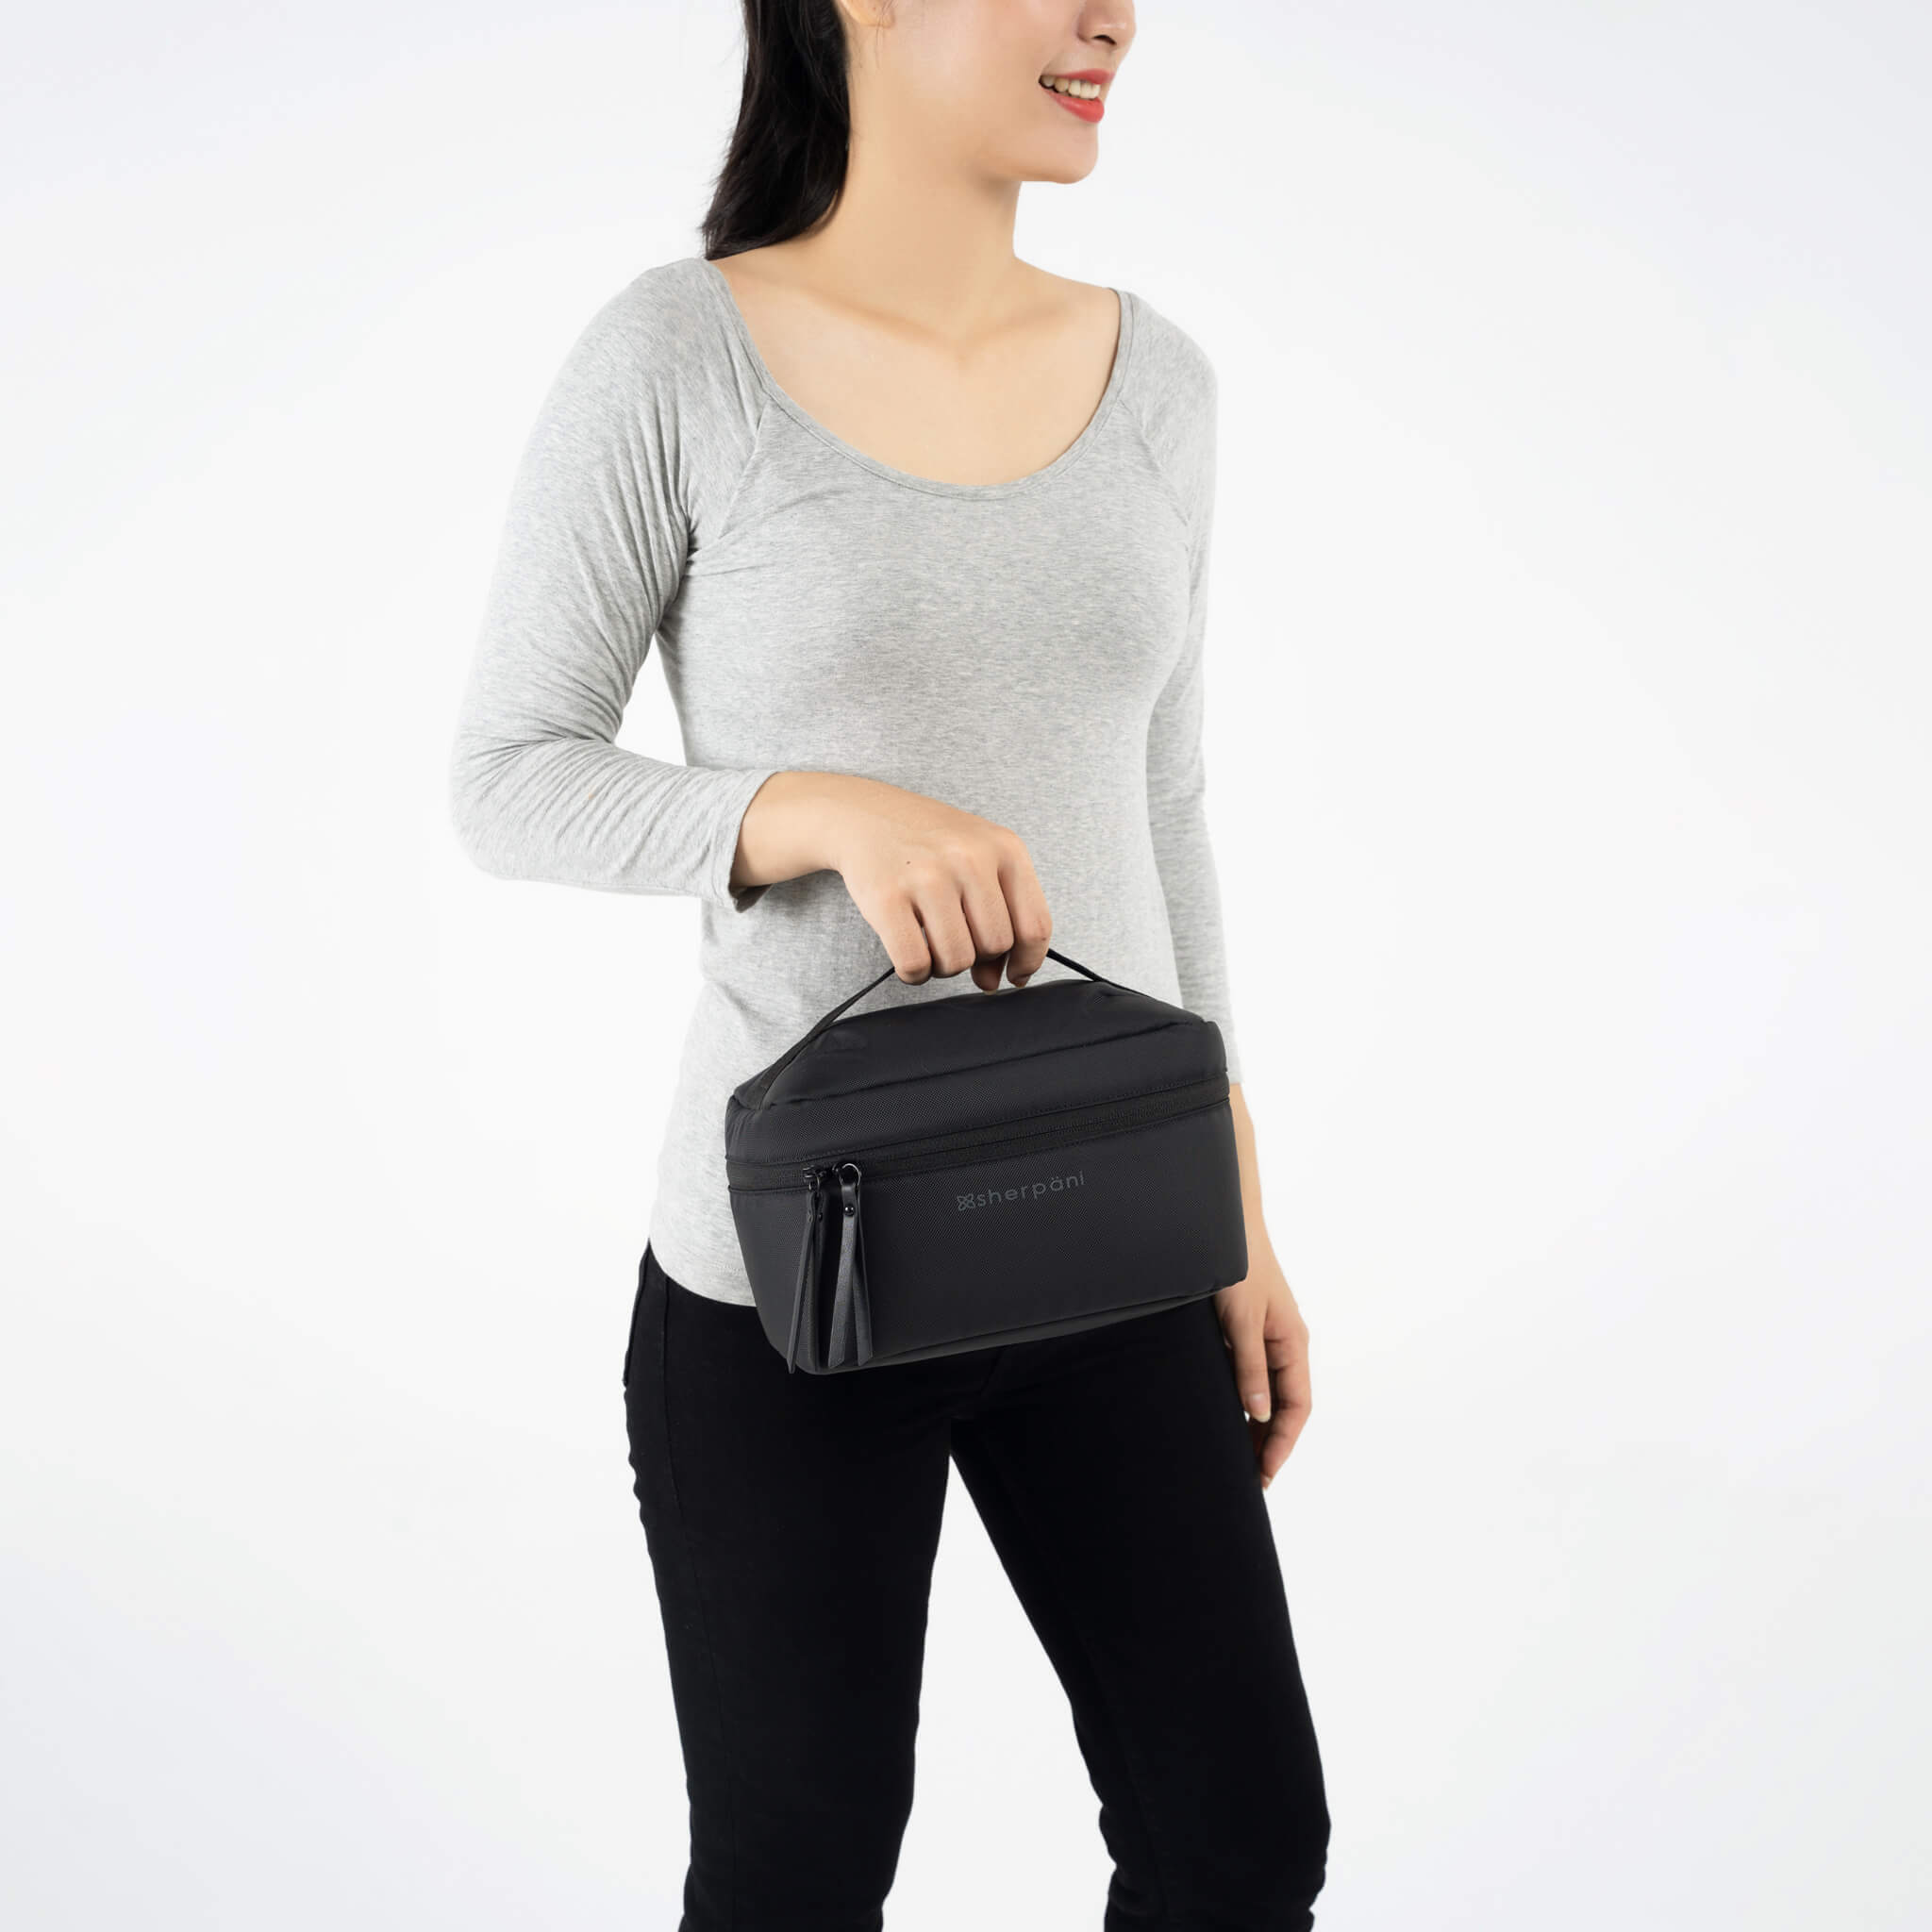 A model wearing black leggings and a gray top is holding Sherpani travel accessory the Savannah in Carbon. 